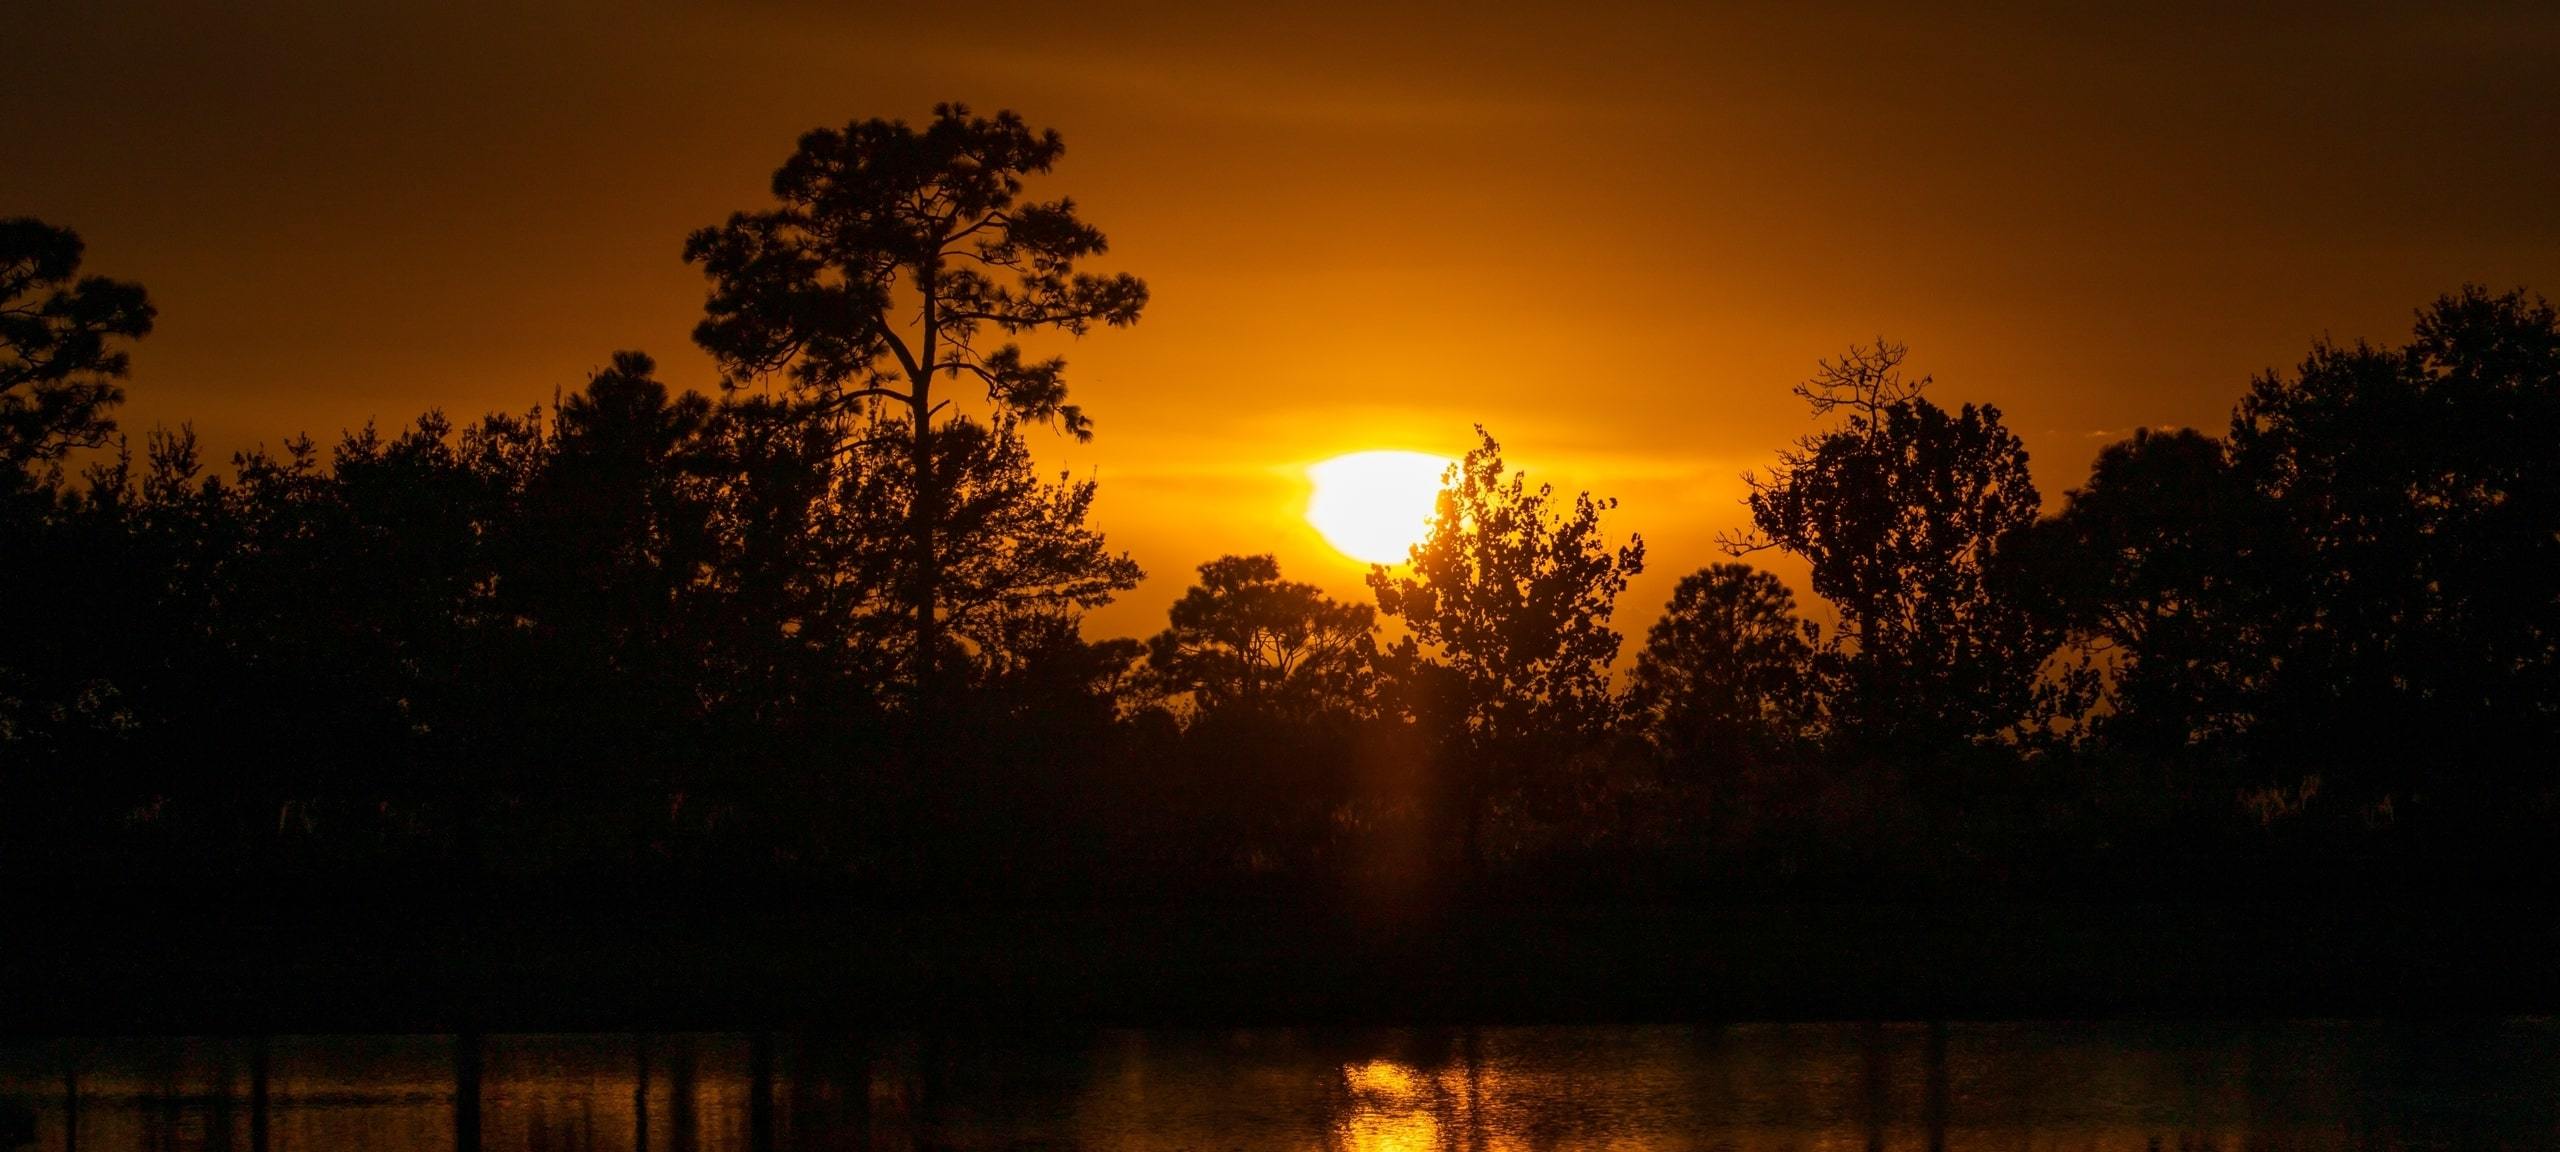 Orange sunset through silhouettes of trees with lake reflections, Bay Hill